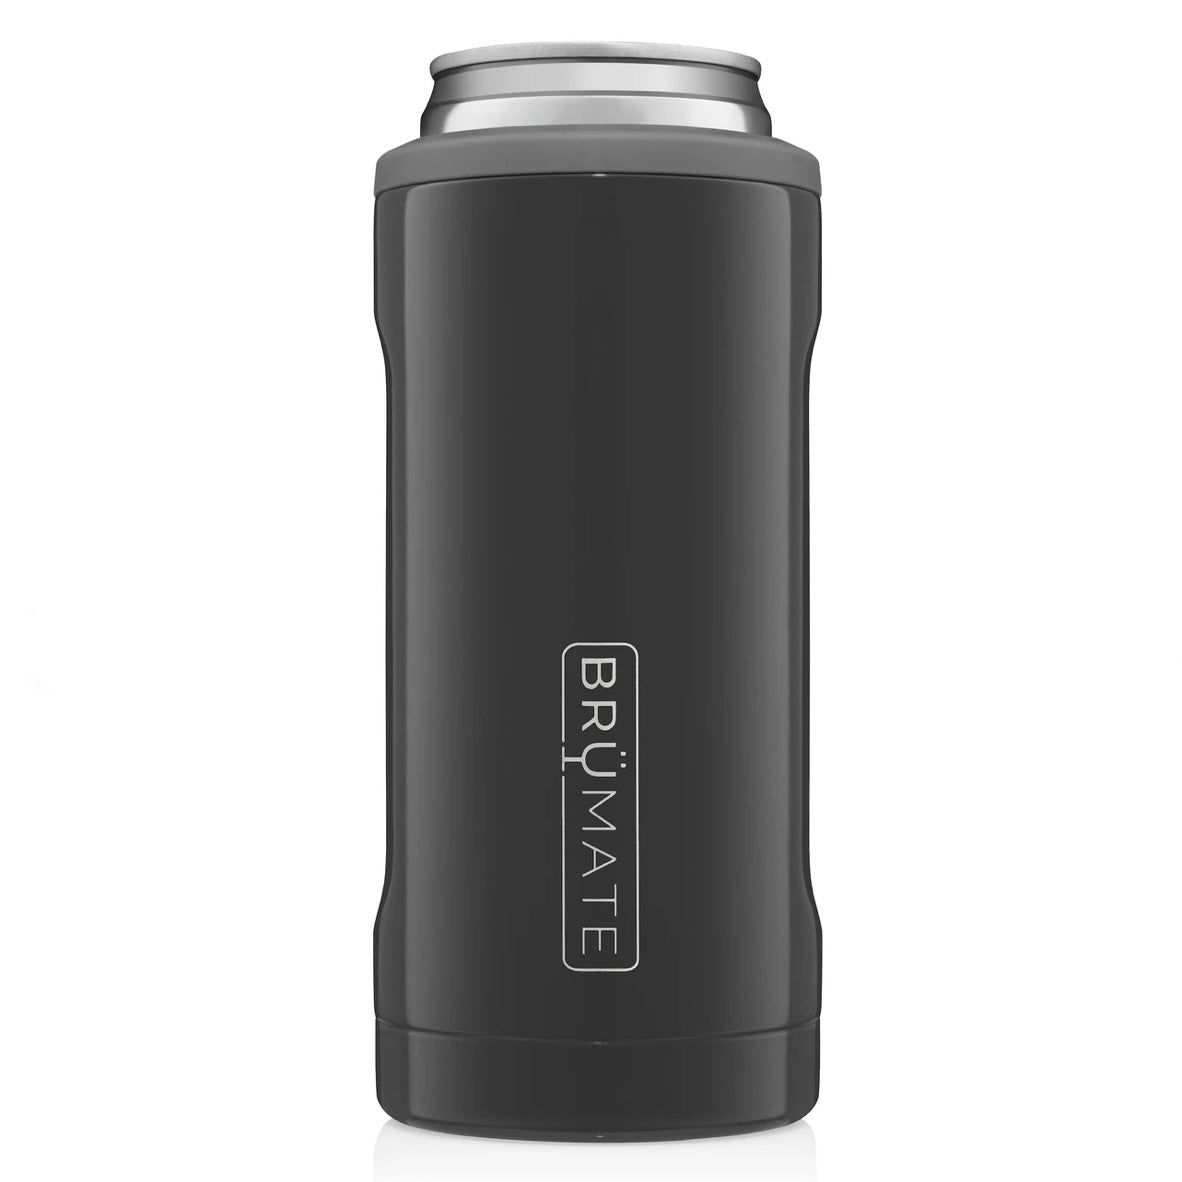 slim cans leak-proof drinkware hot to cold insulated drinkware tumbler like yeti brumate spillproof black glossy